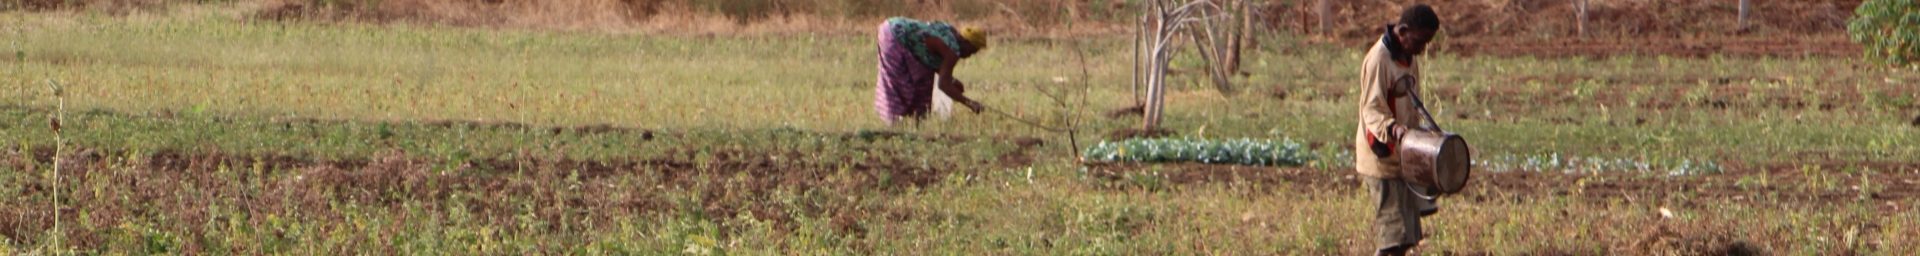 Initiative: Resource Centre on Urban Agriculture and Food Security - Anglophone West Africa